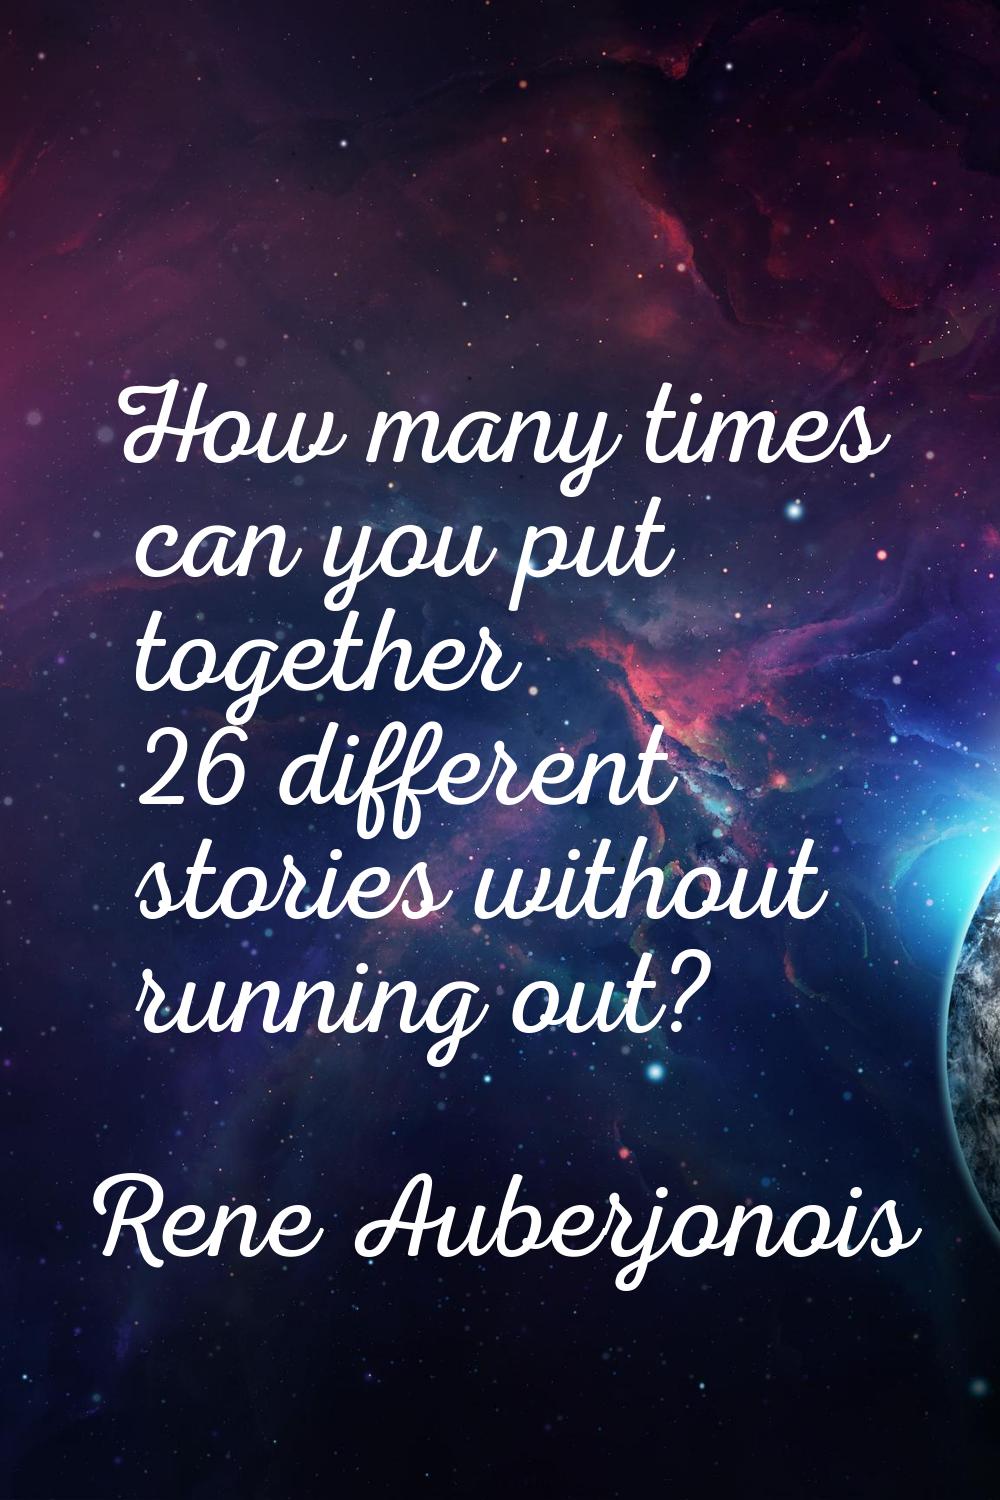 How many times can you put together 26 different stories without running out?